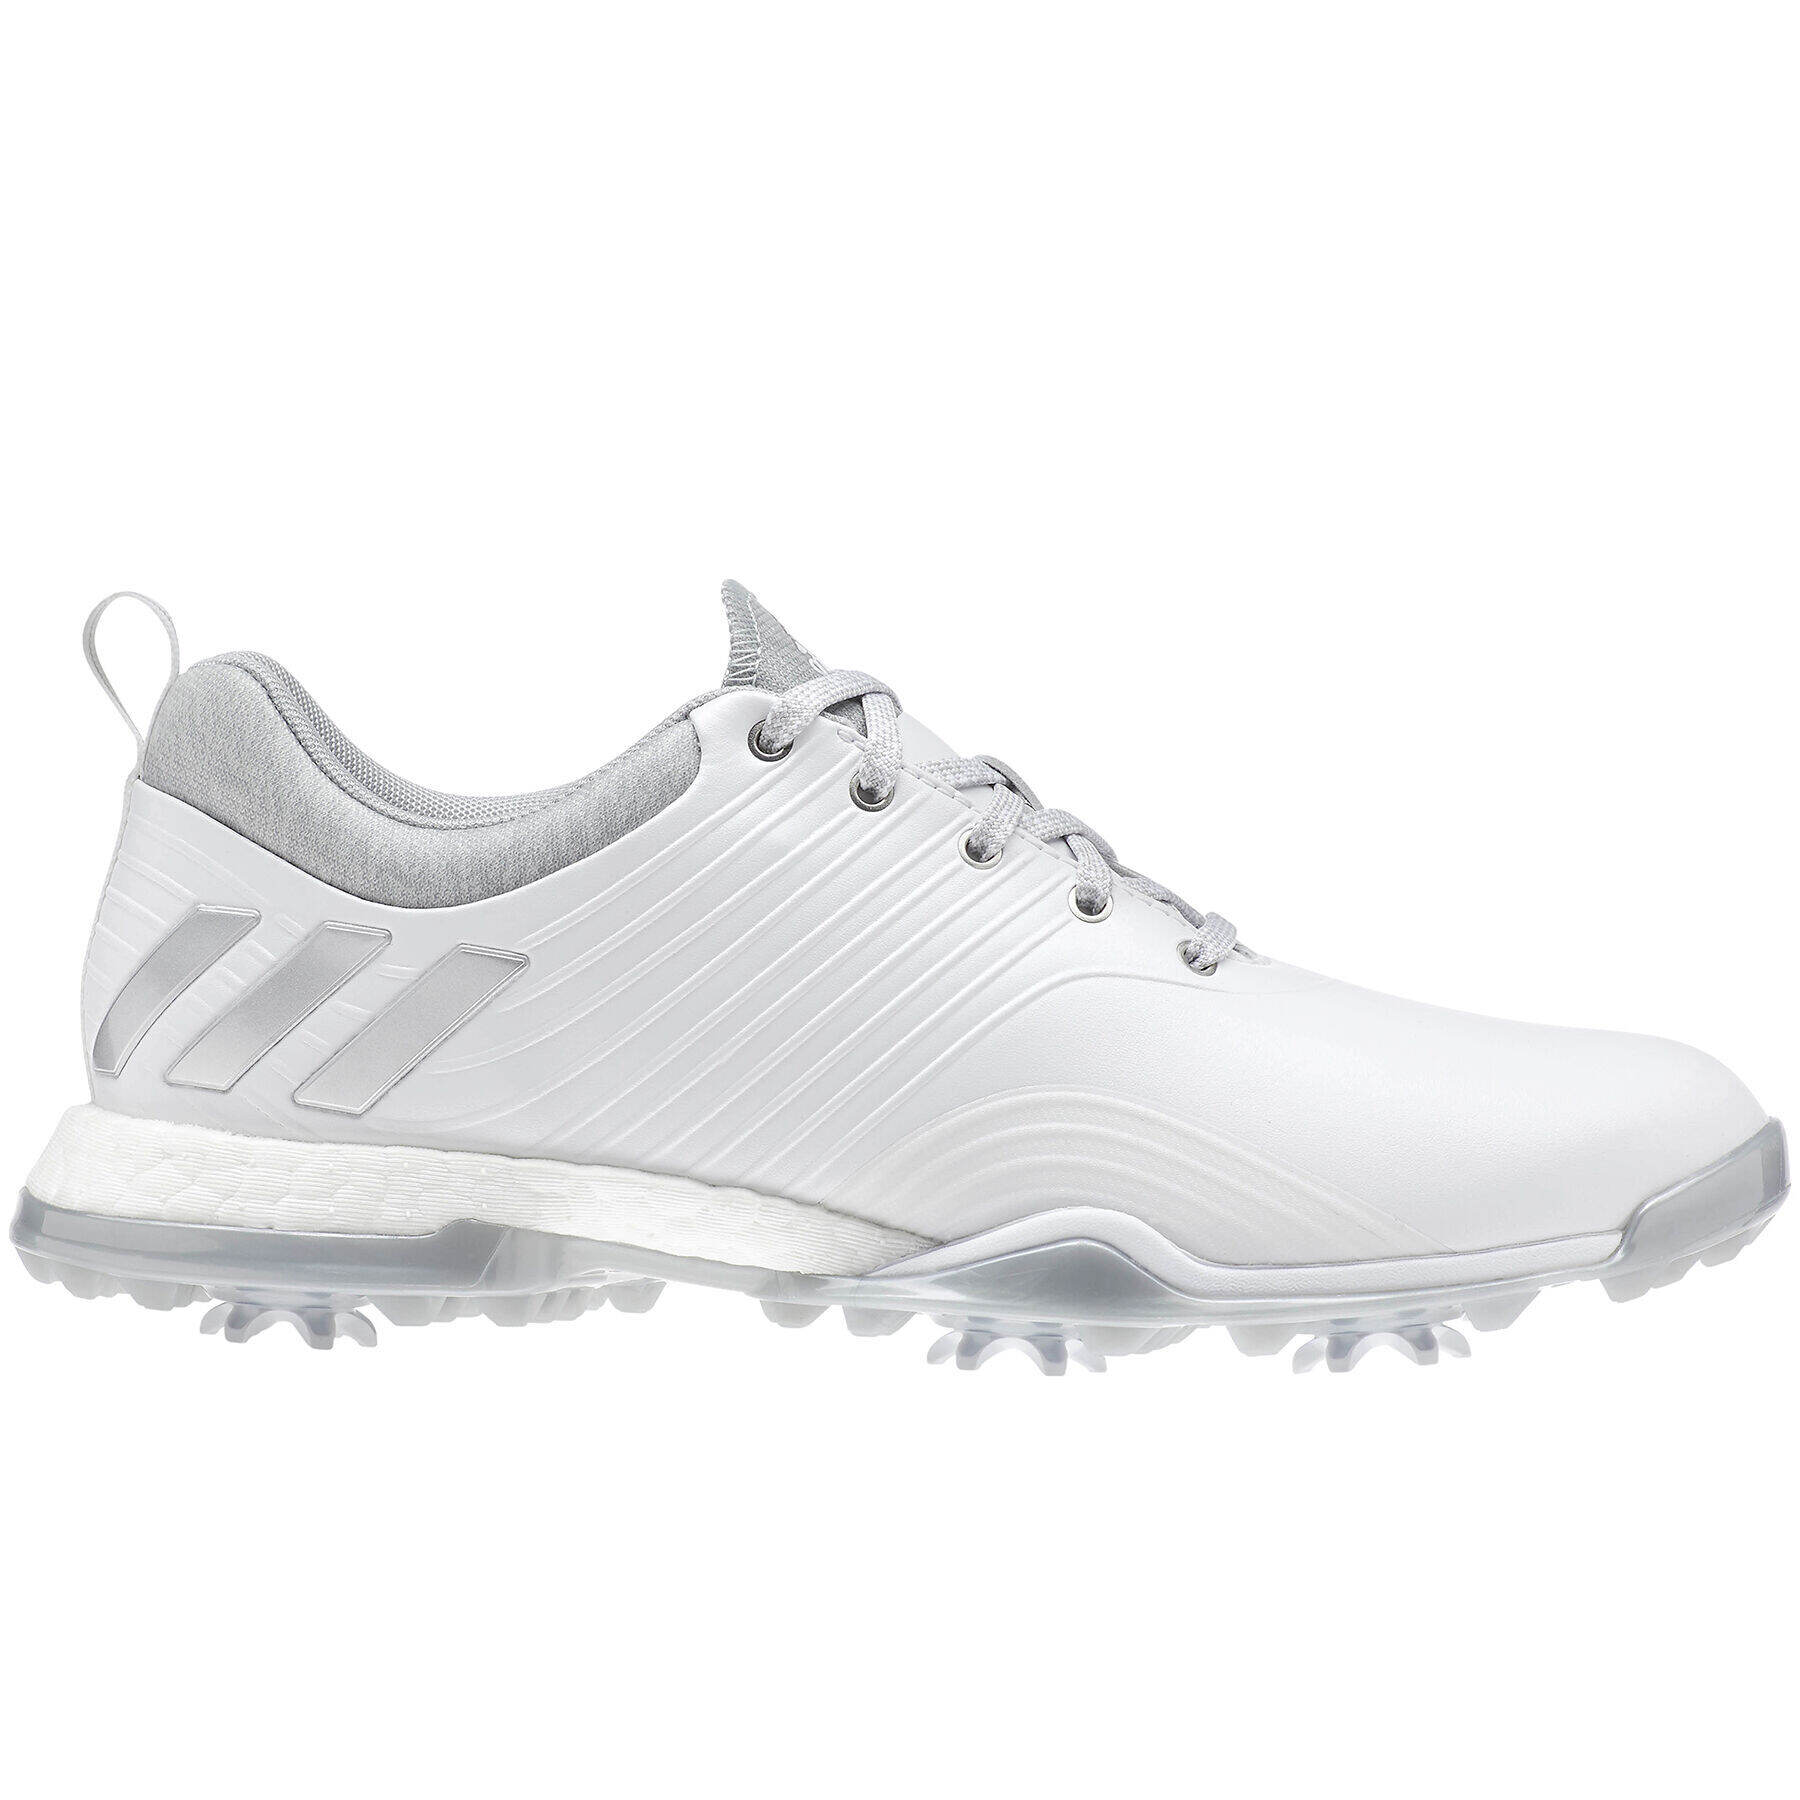 adidas women's adipower 4orged golf shoes